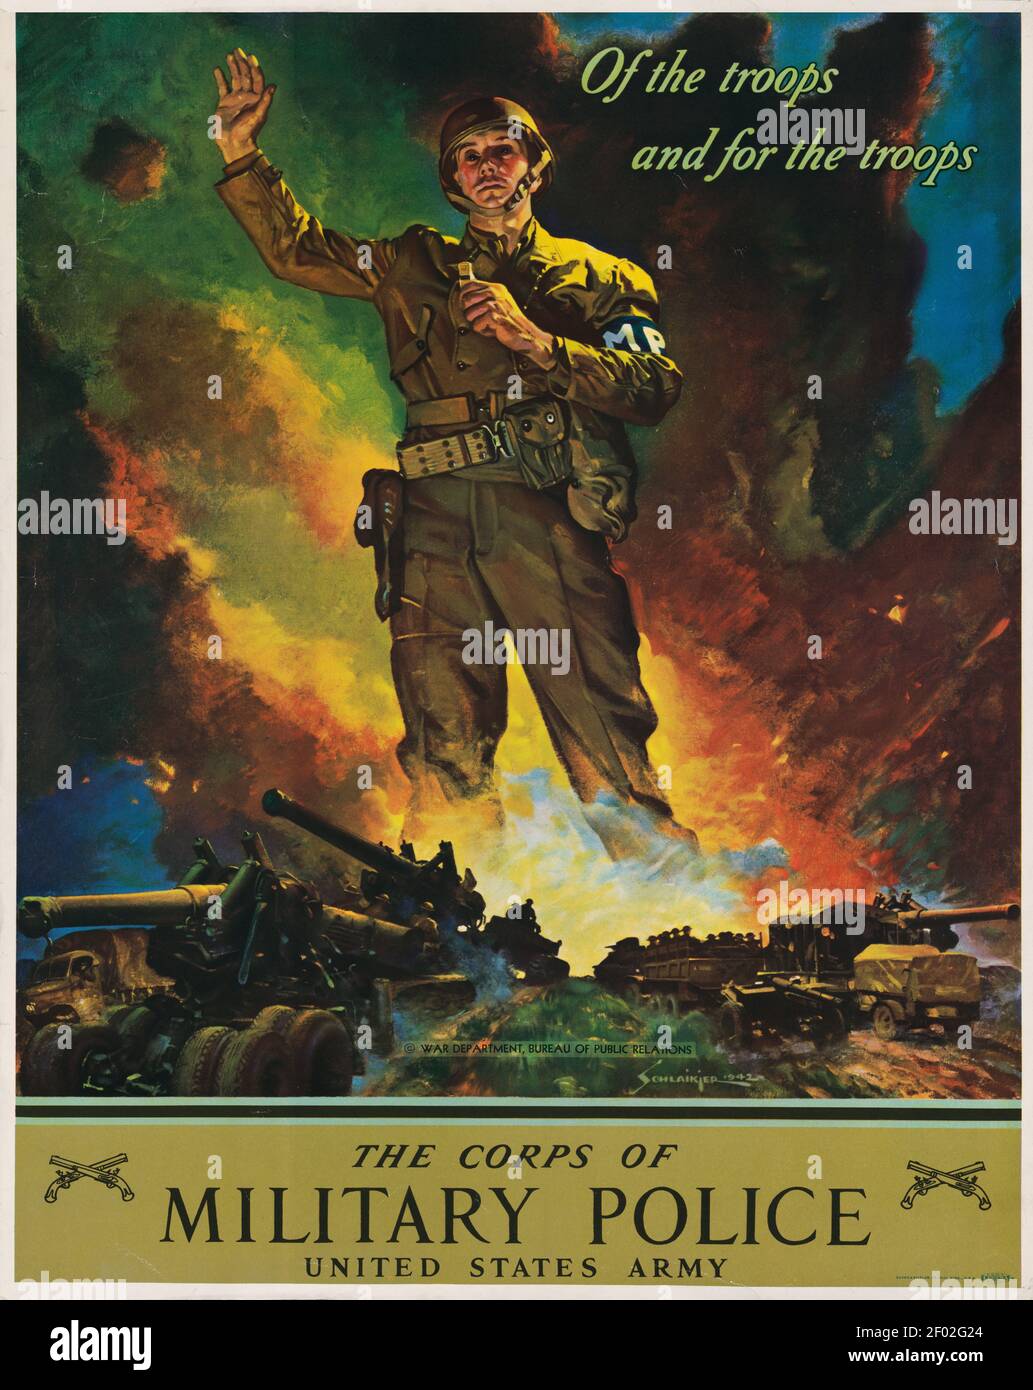 Of the troops and for the troops. The Corps of Military Police. Army poster or ad. United States Army. Stock Photo